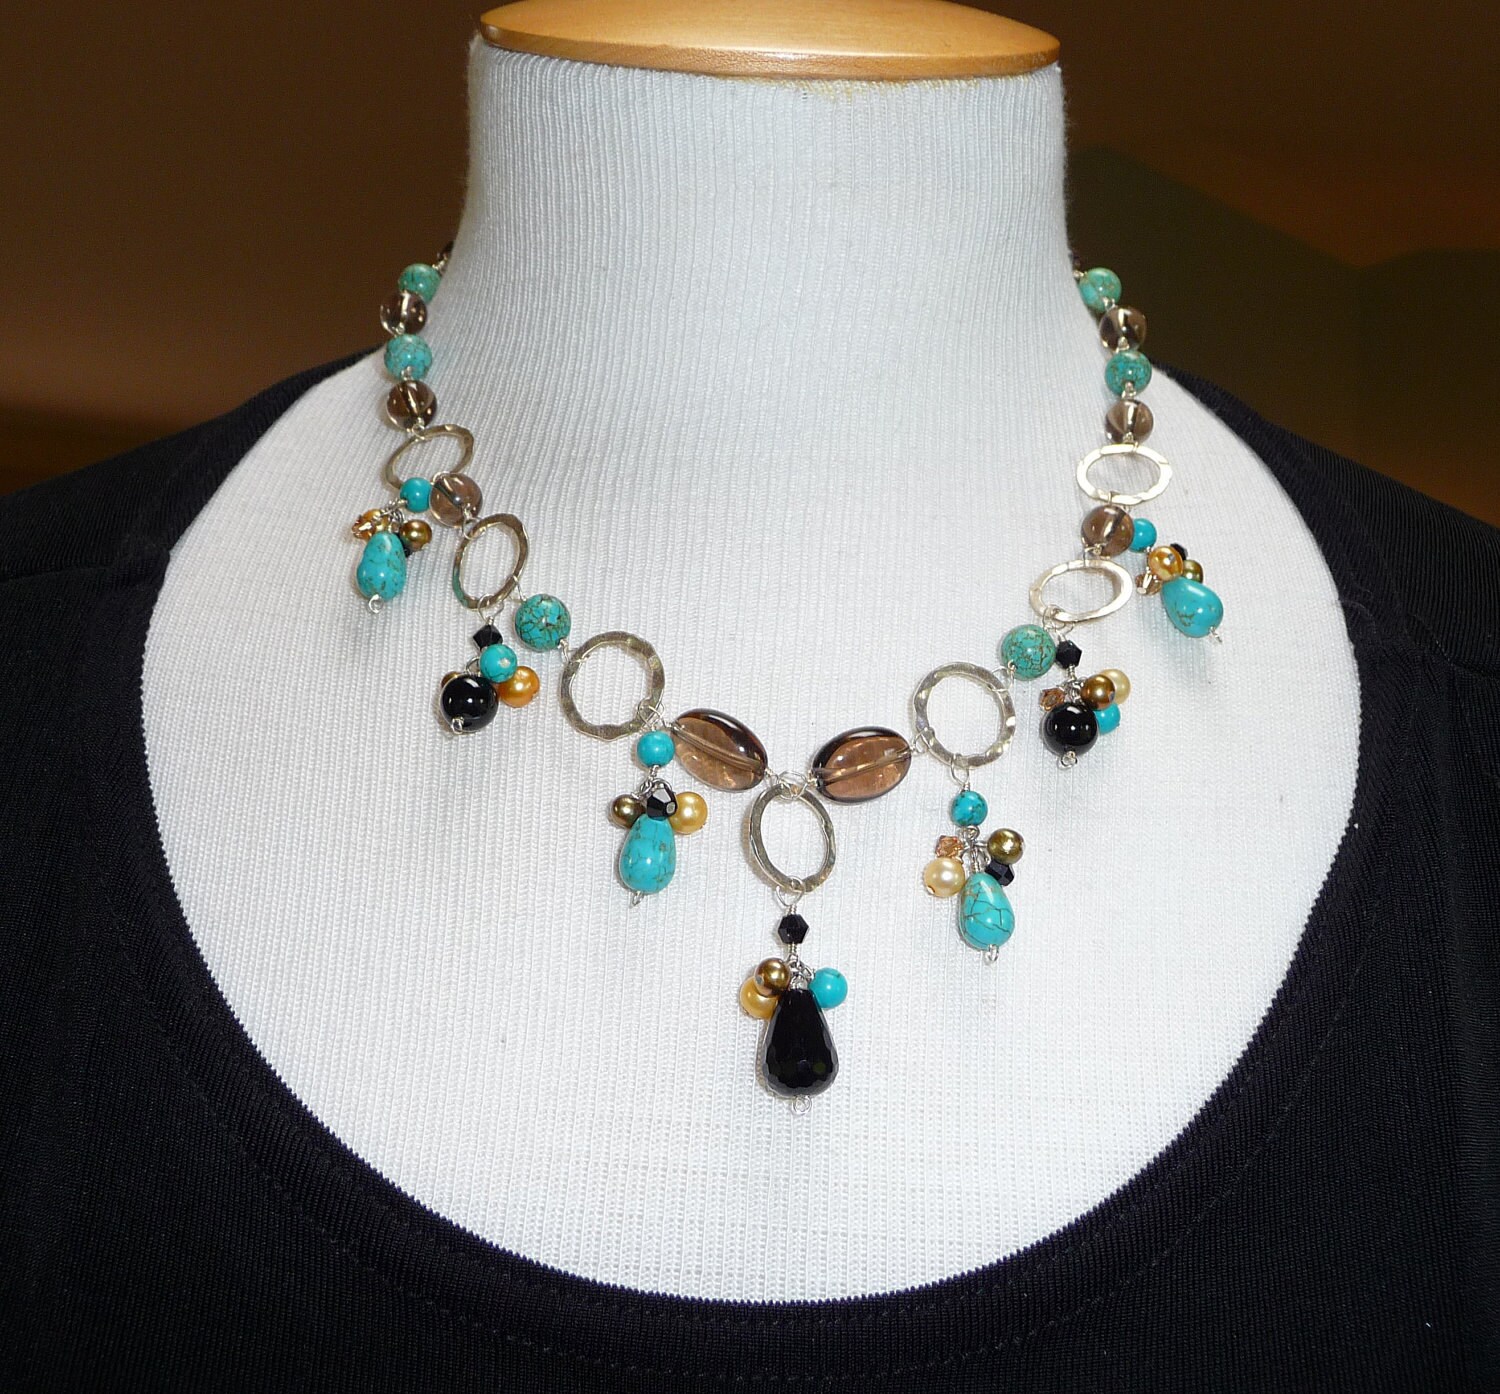 Turquoise and Smoky Quartz Necklace N1368 by jewelry49 on Etsy